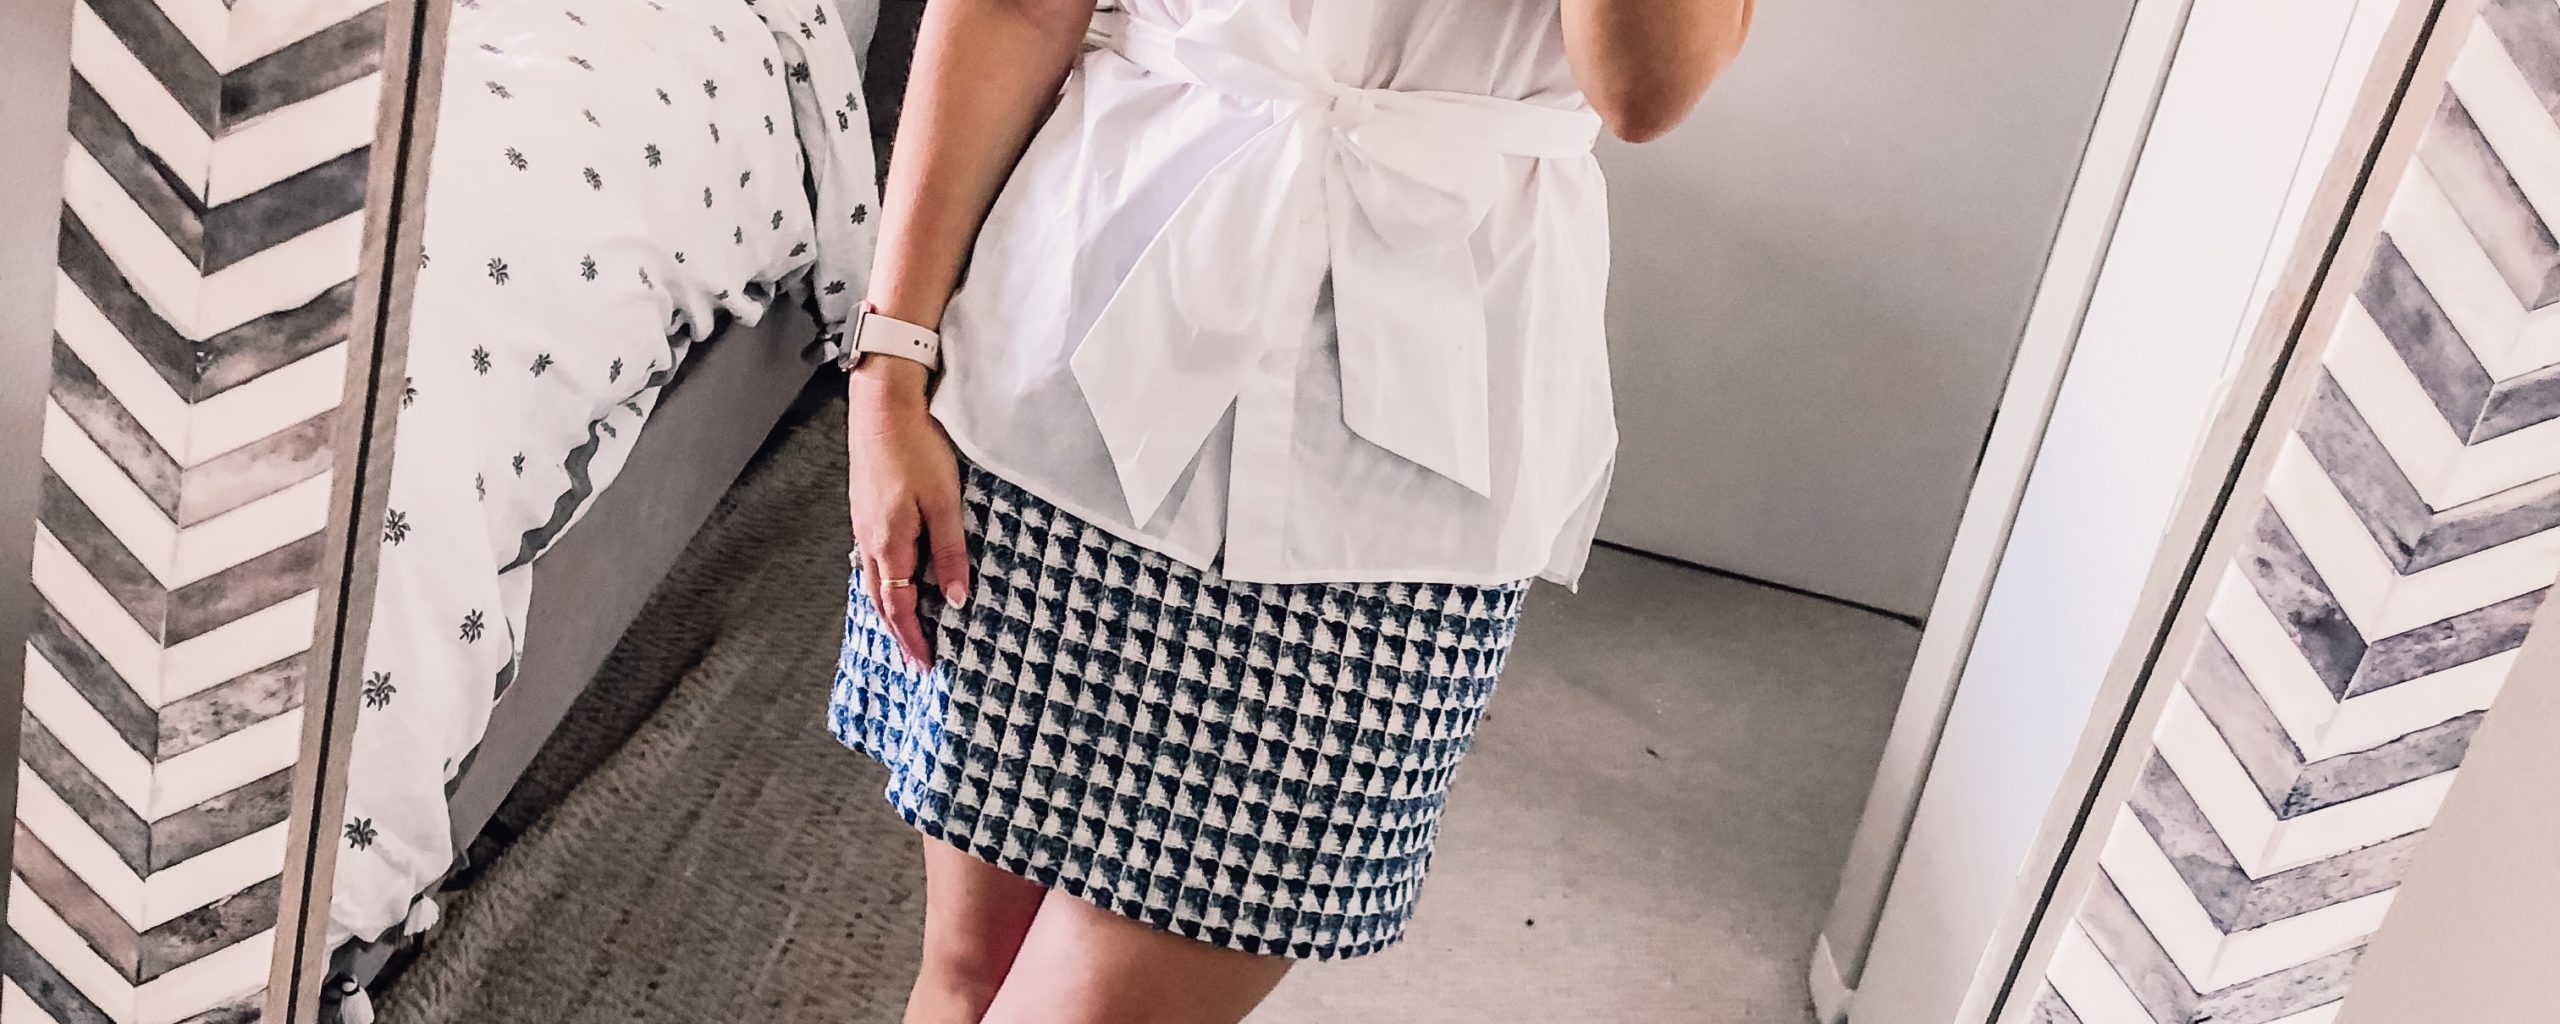 J.Crew Button Down and Geometric Skirt from LOFT for an office outfit